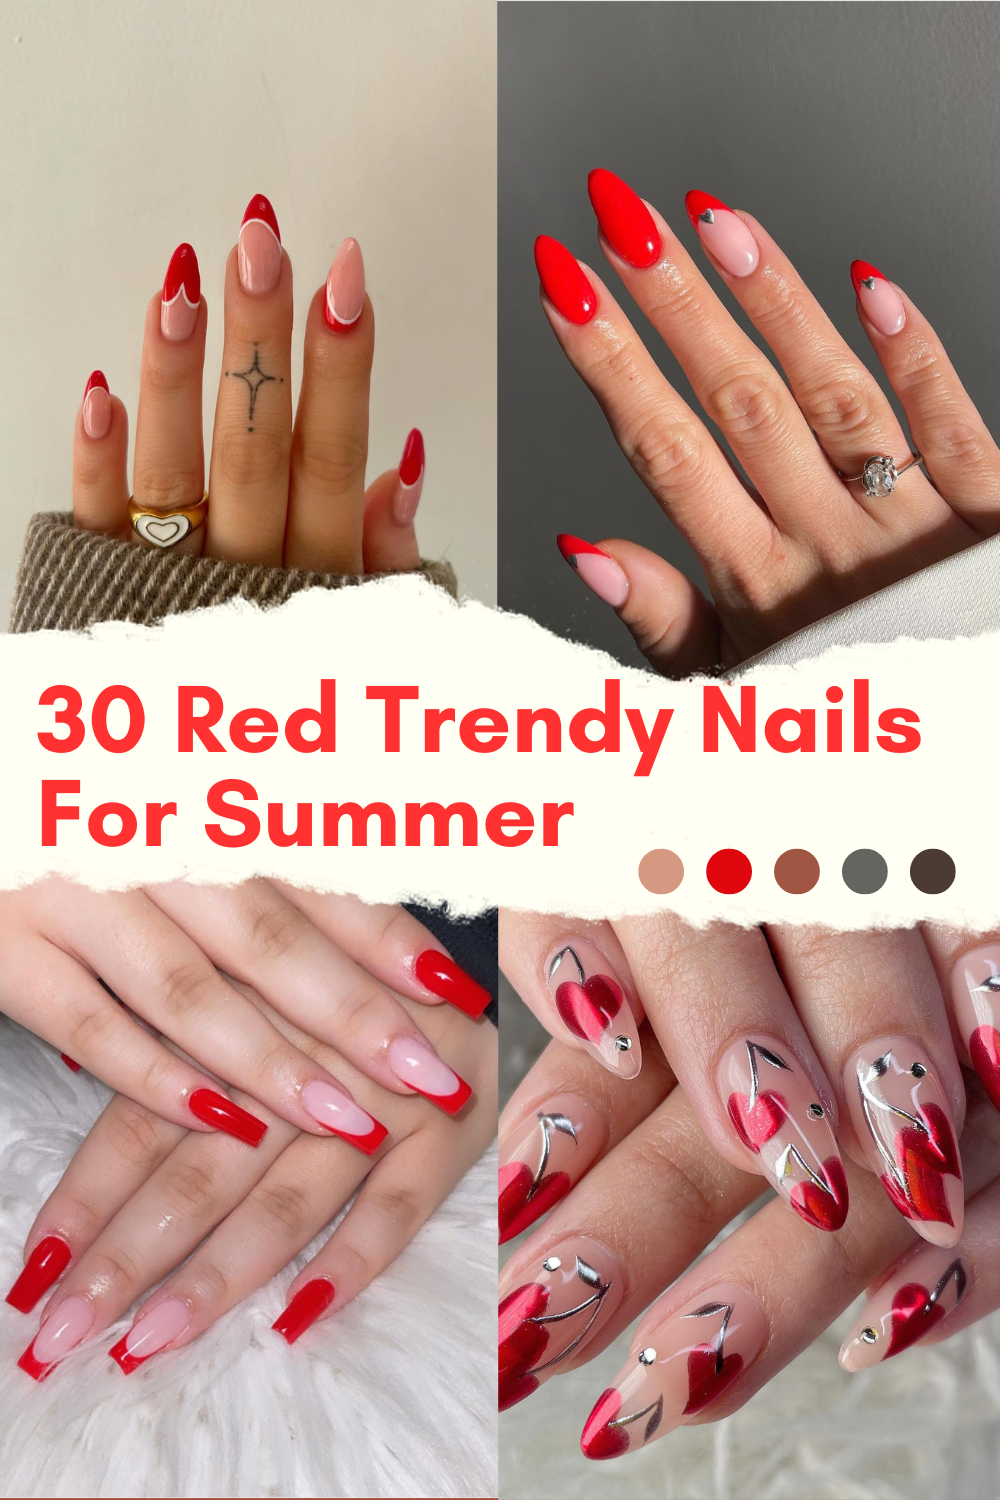 30 red trendy nails for summer